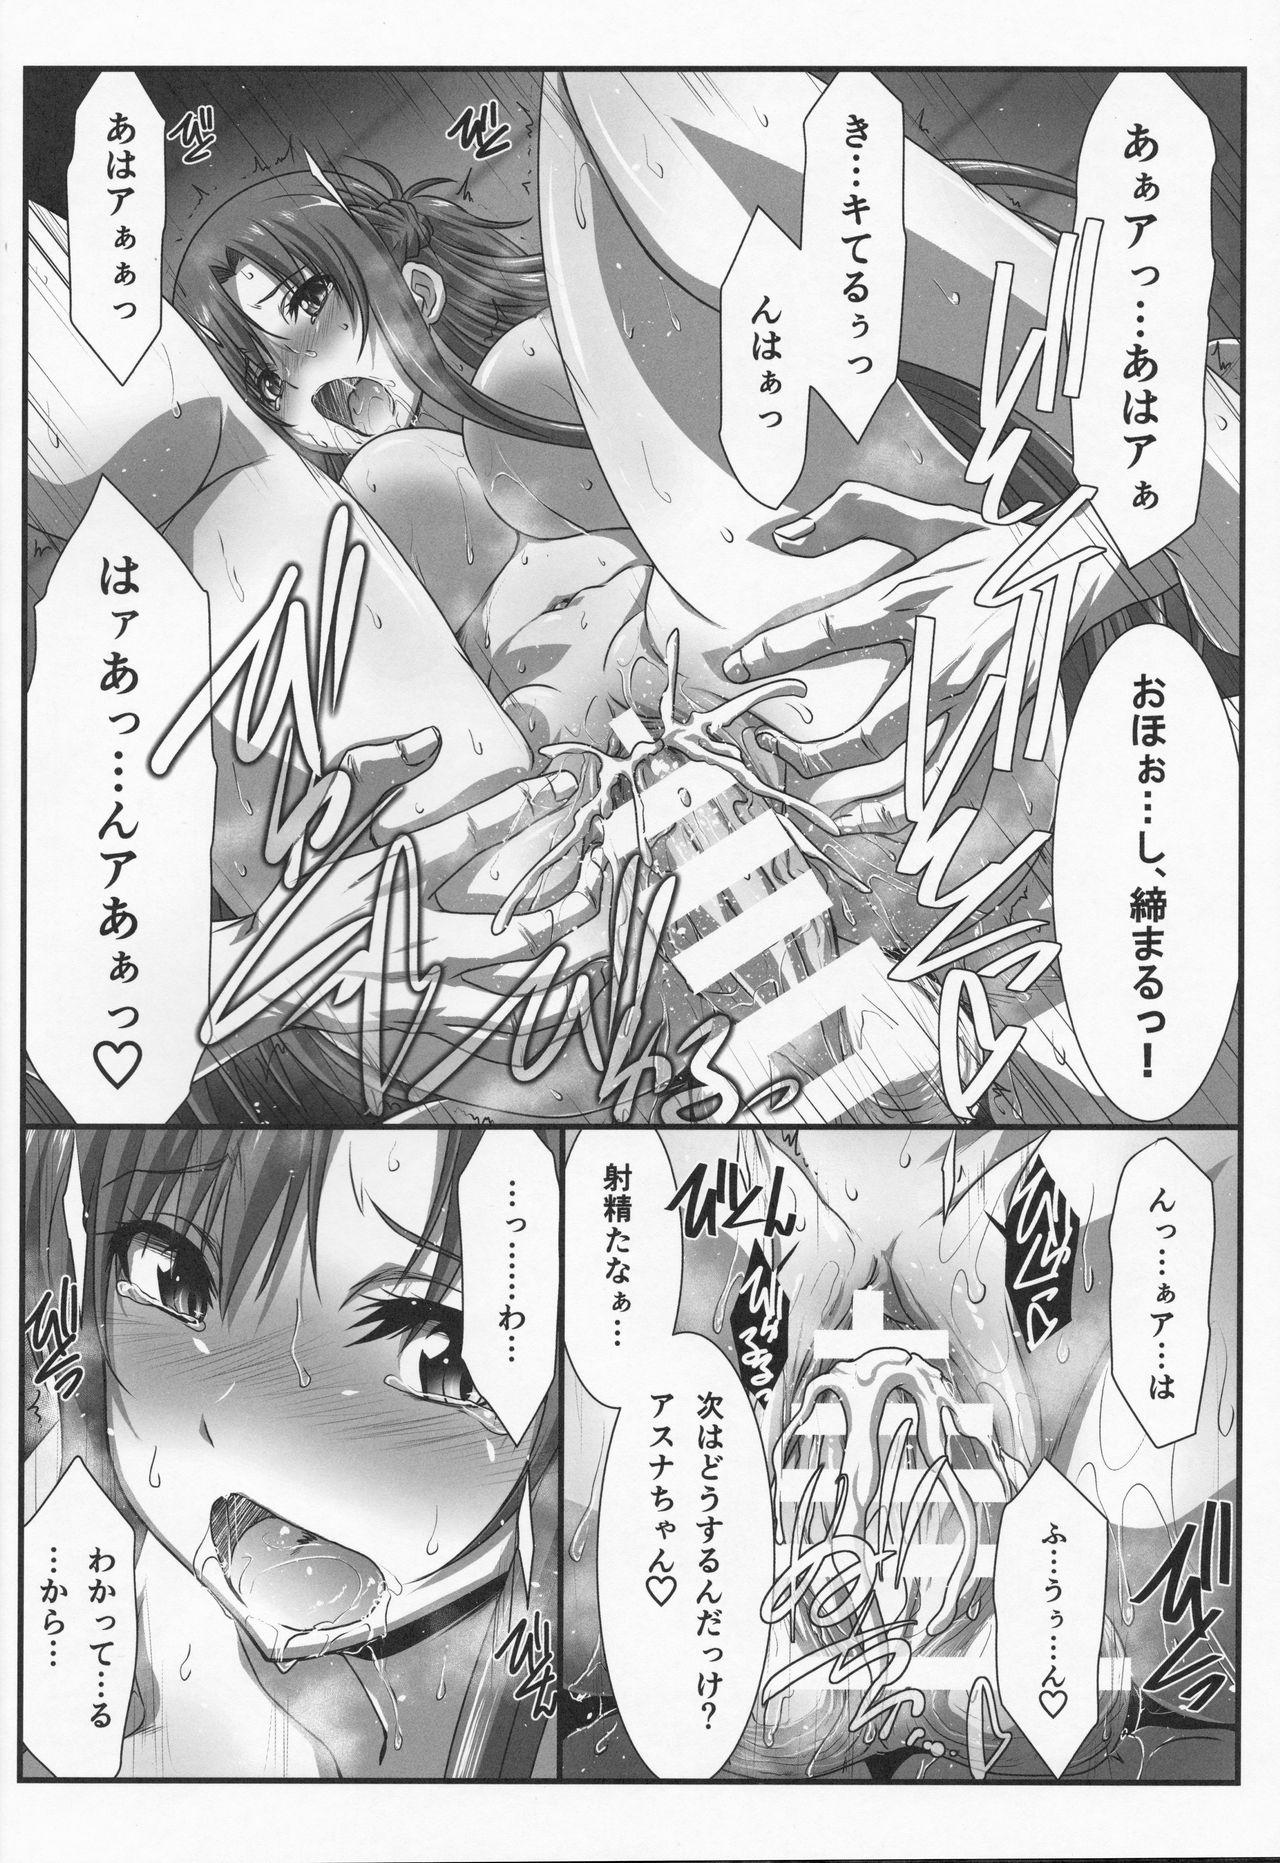 Sex Pussy Astral Bout Ver. 42 - Sword art online Black Thugs - Page 11